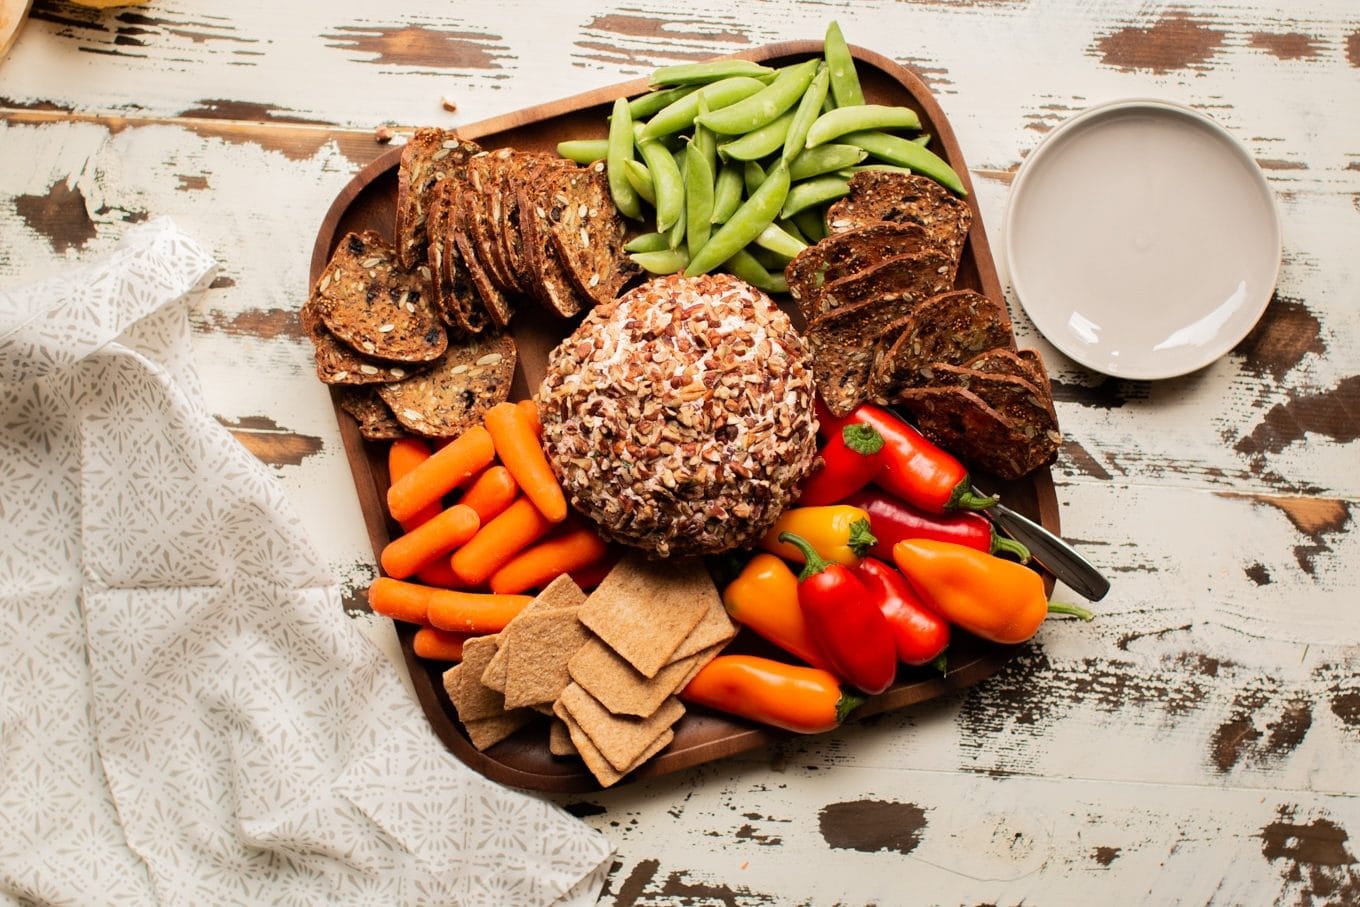 salmon cream cheese ball covered in pecans with veggies and crackers around it.